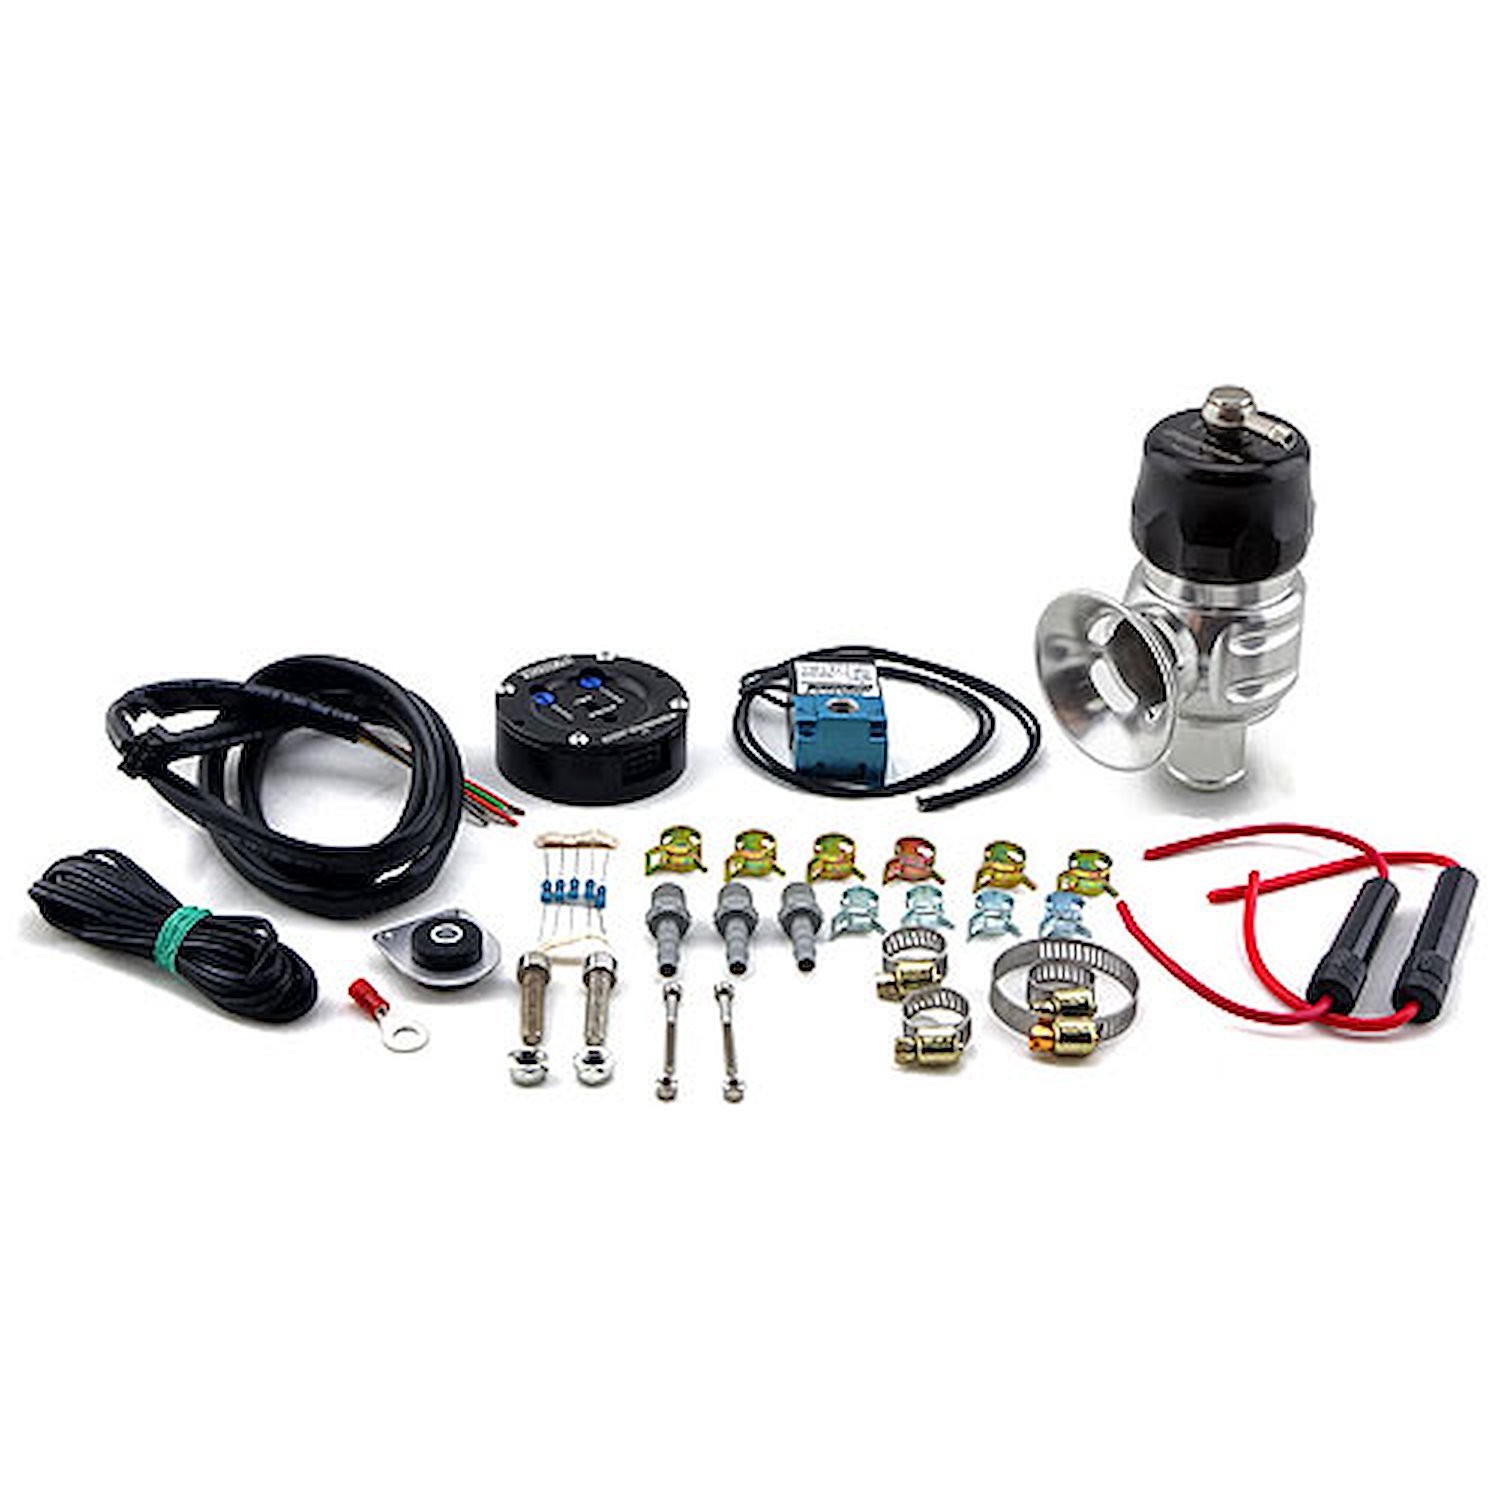 Blow-Off Valve Controller Kit Supersonic Type 5 Series